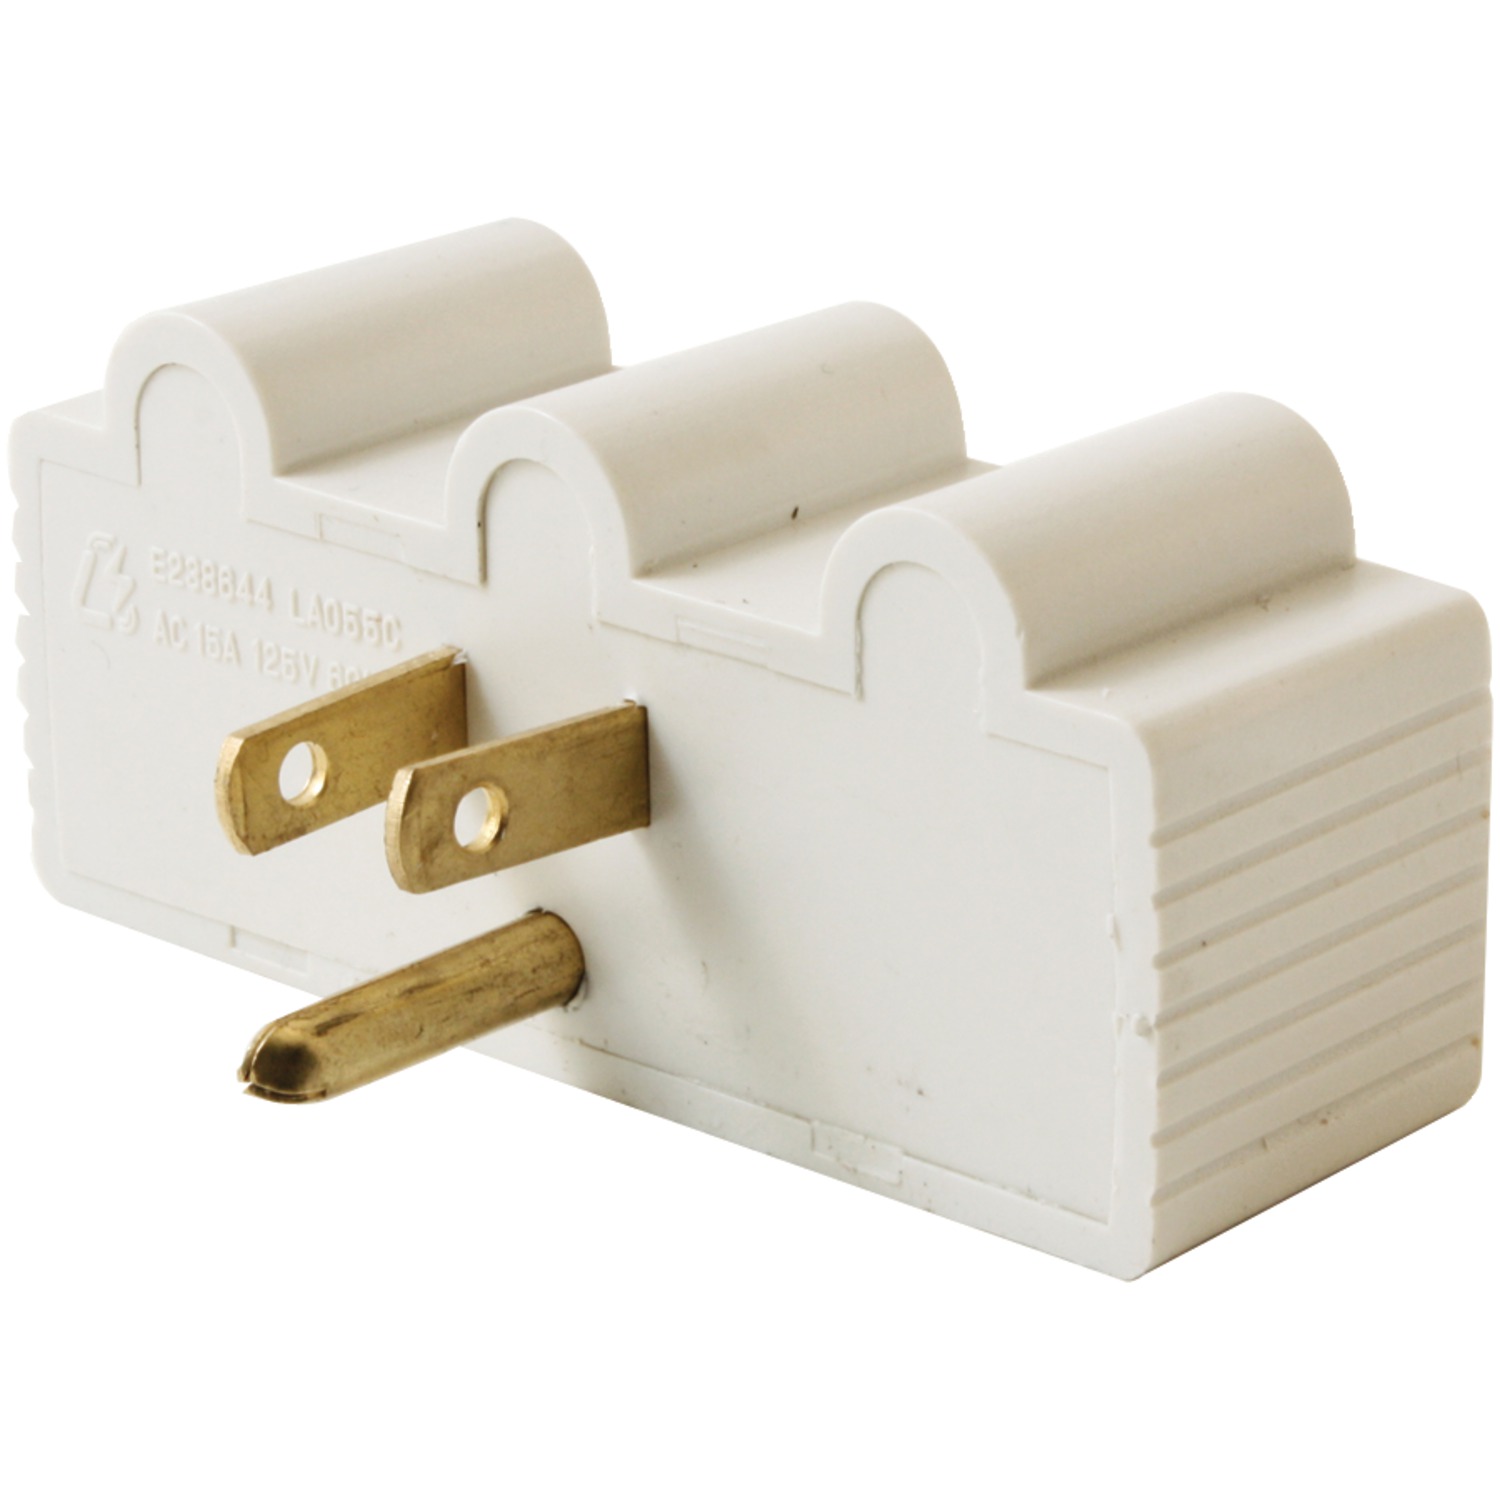 Axis 45090 3-Outlet Wall Adapter - image 2 of 14